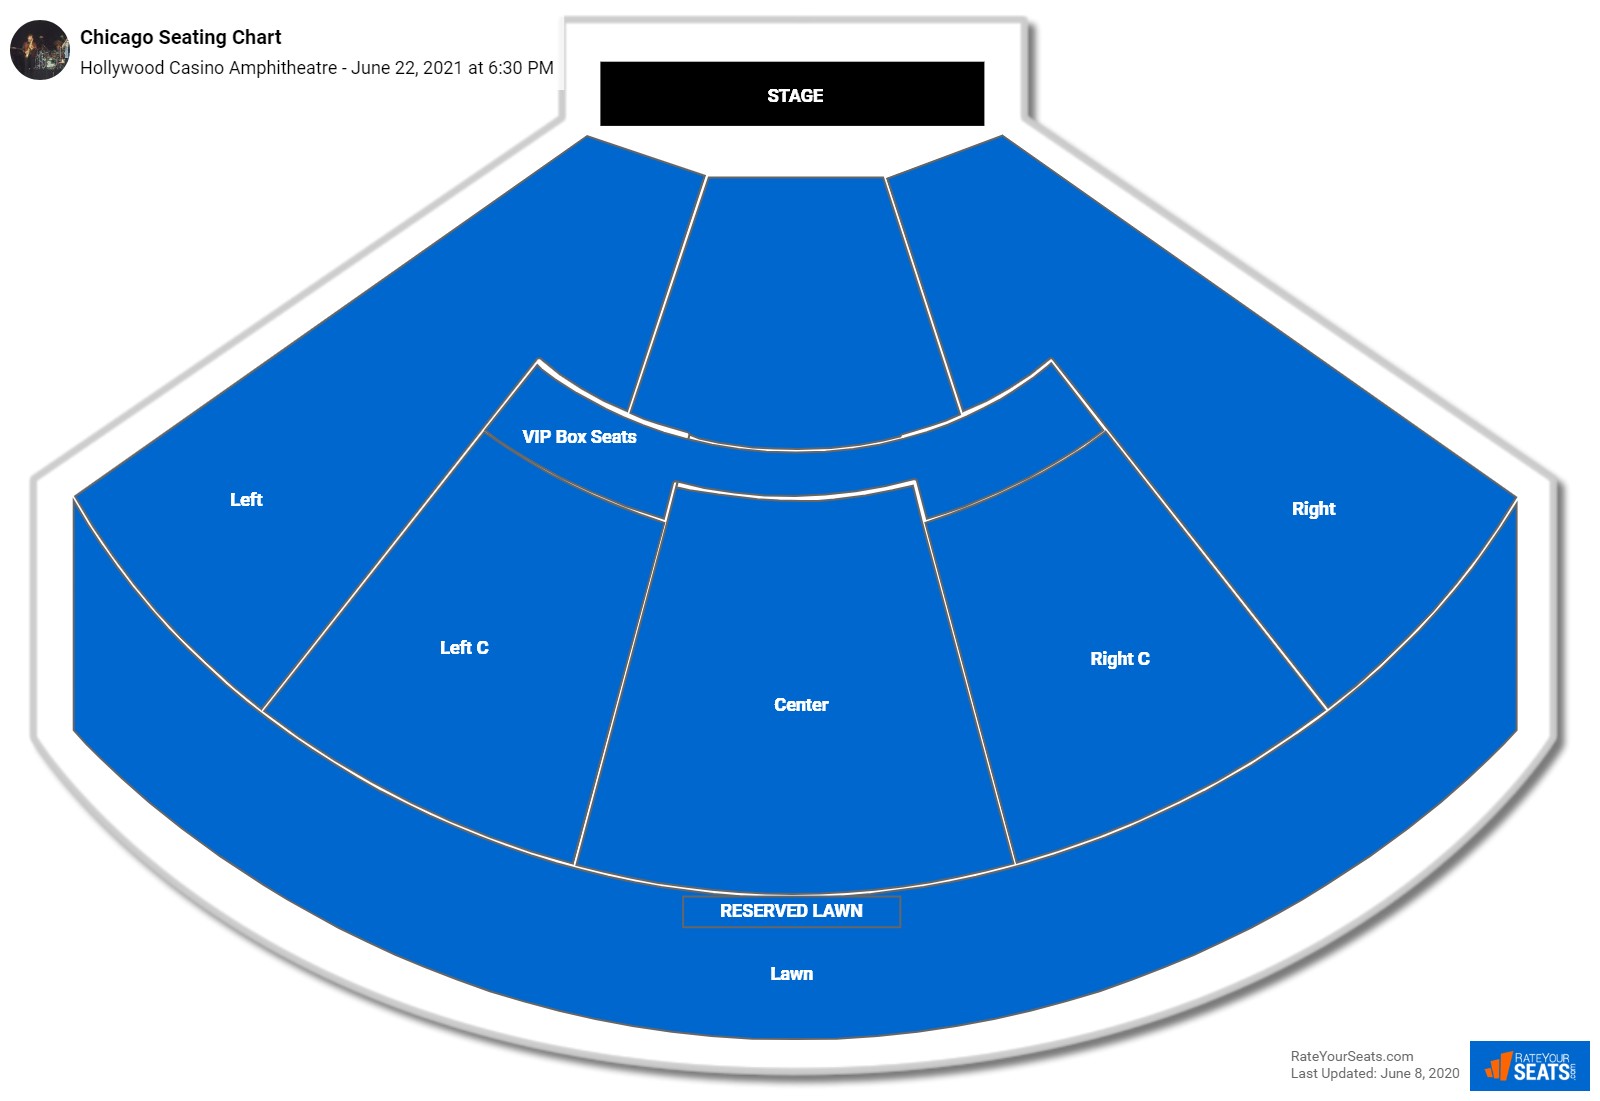 Chicago Hollywood Casino Amphitheatre Seating Chart June 22 2021 3358438 